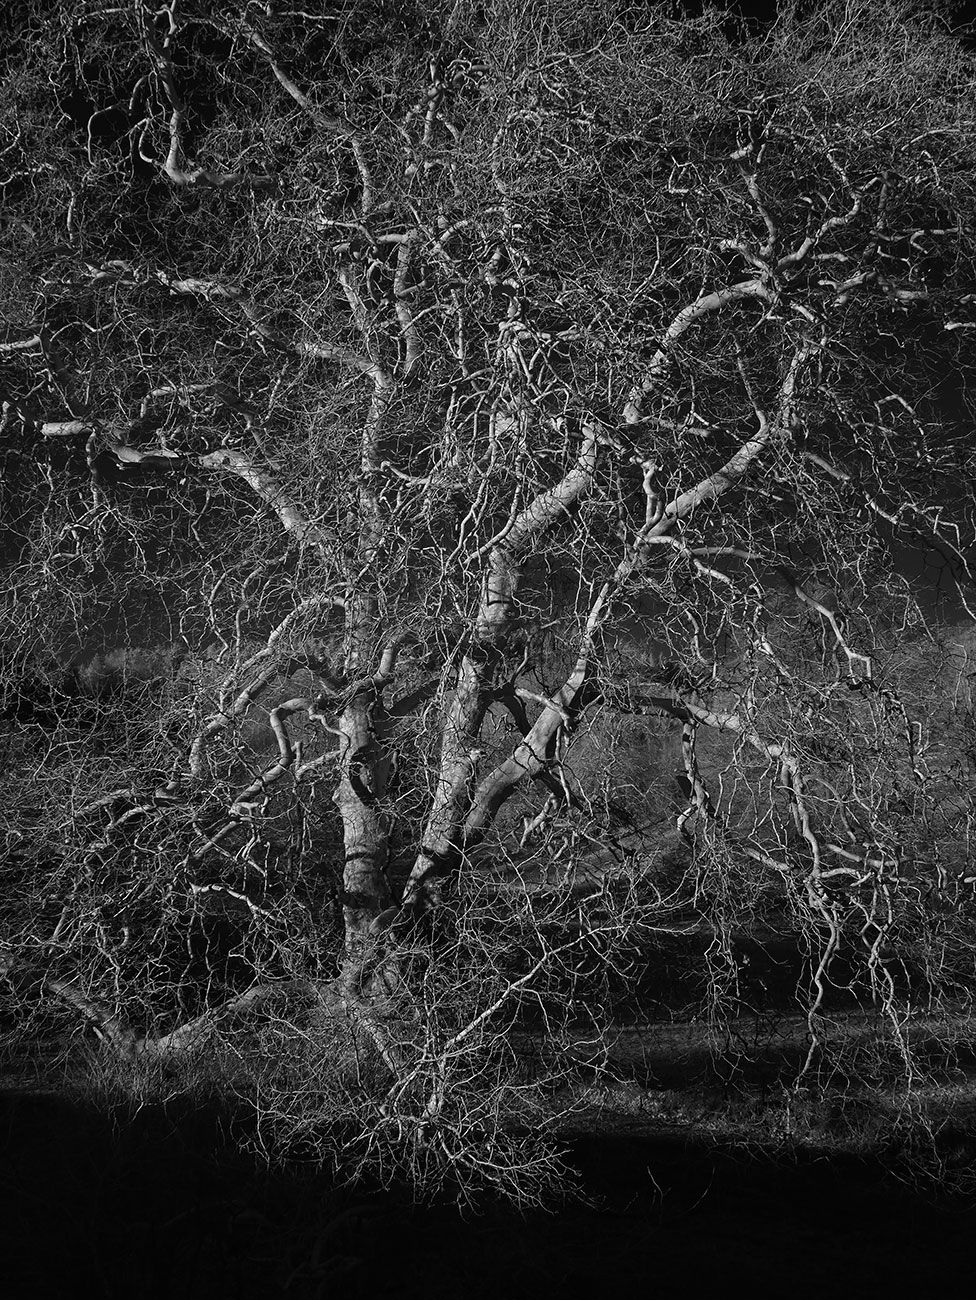 A detailed black and white image of a tree without leaves